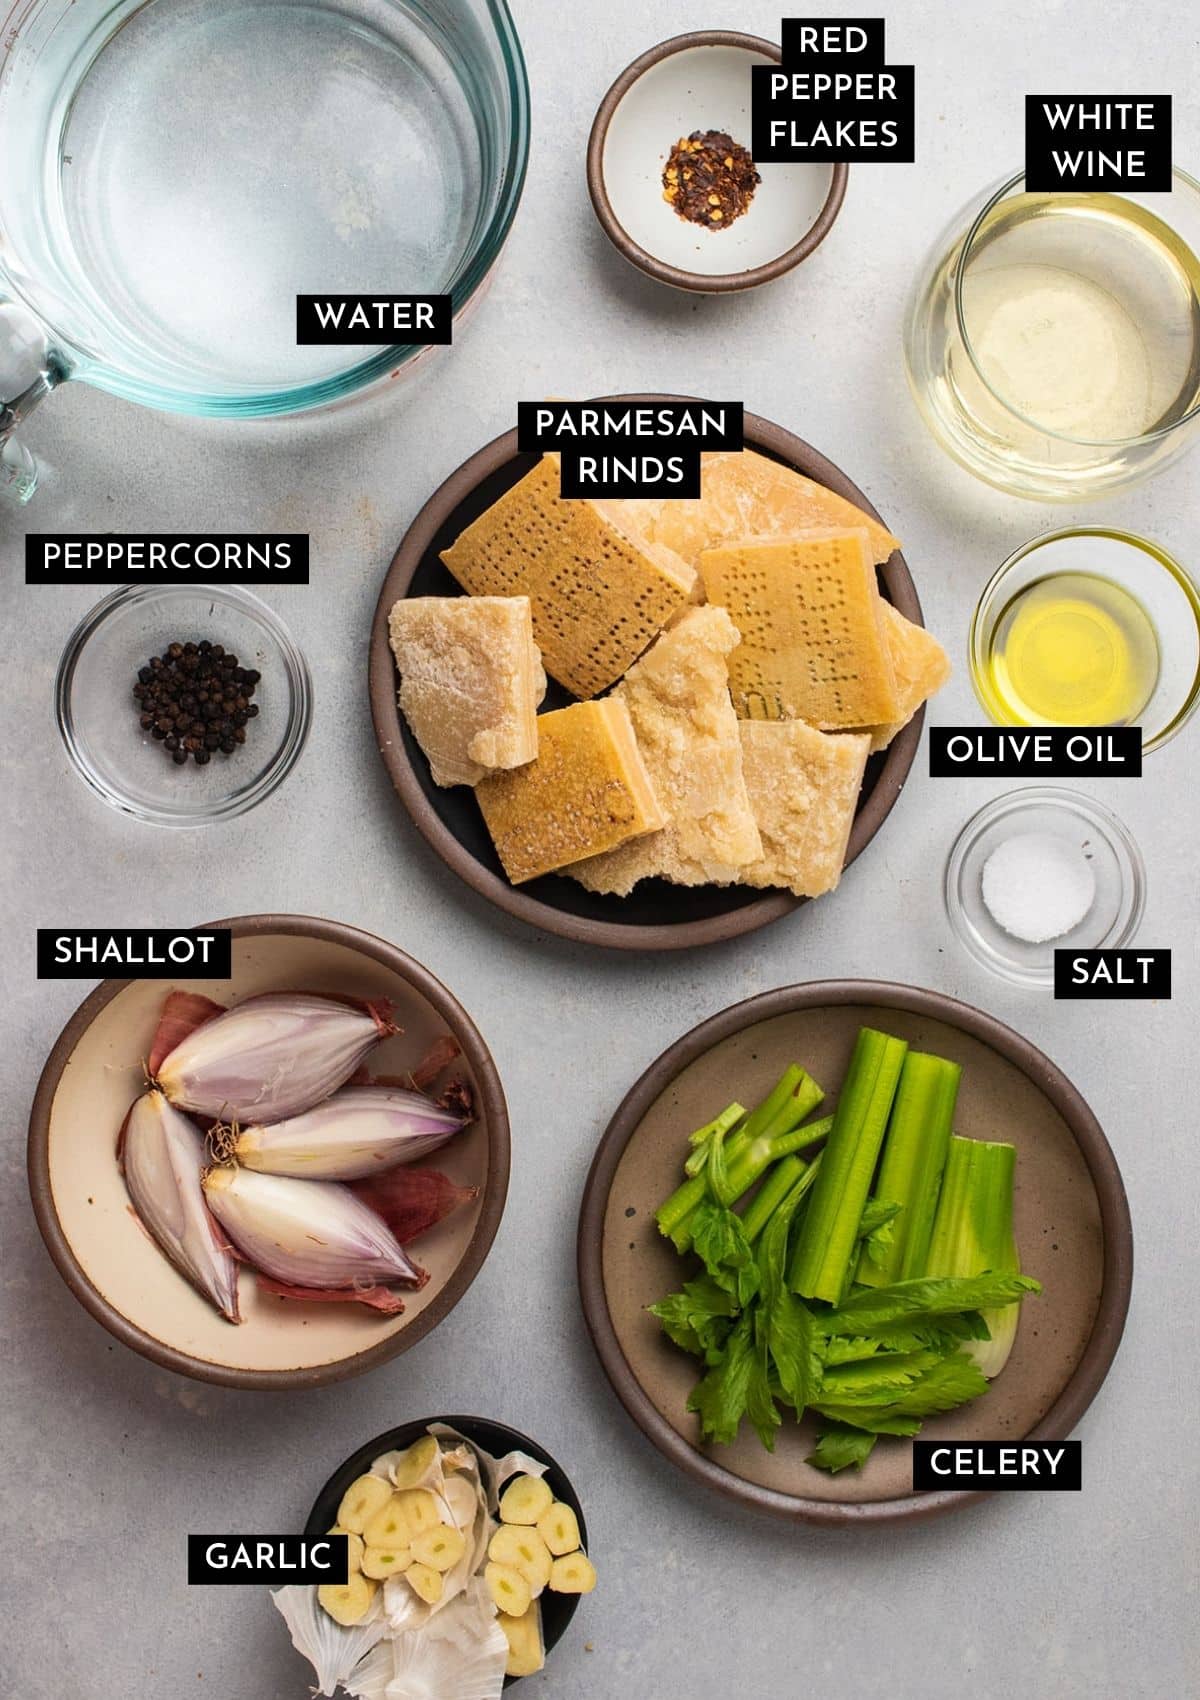 Parmesan broth ingredients, organized into individual bowls on a white table.